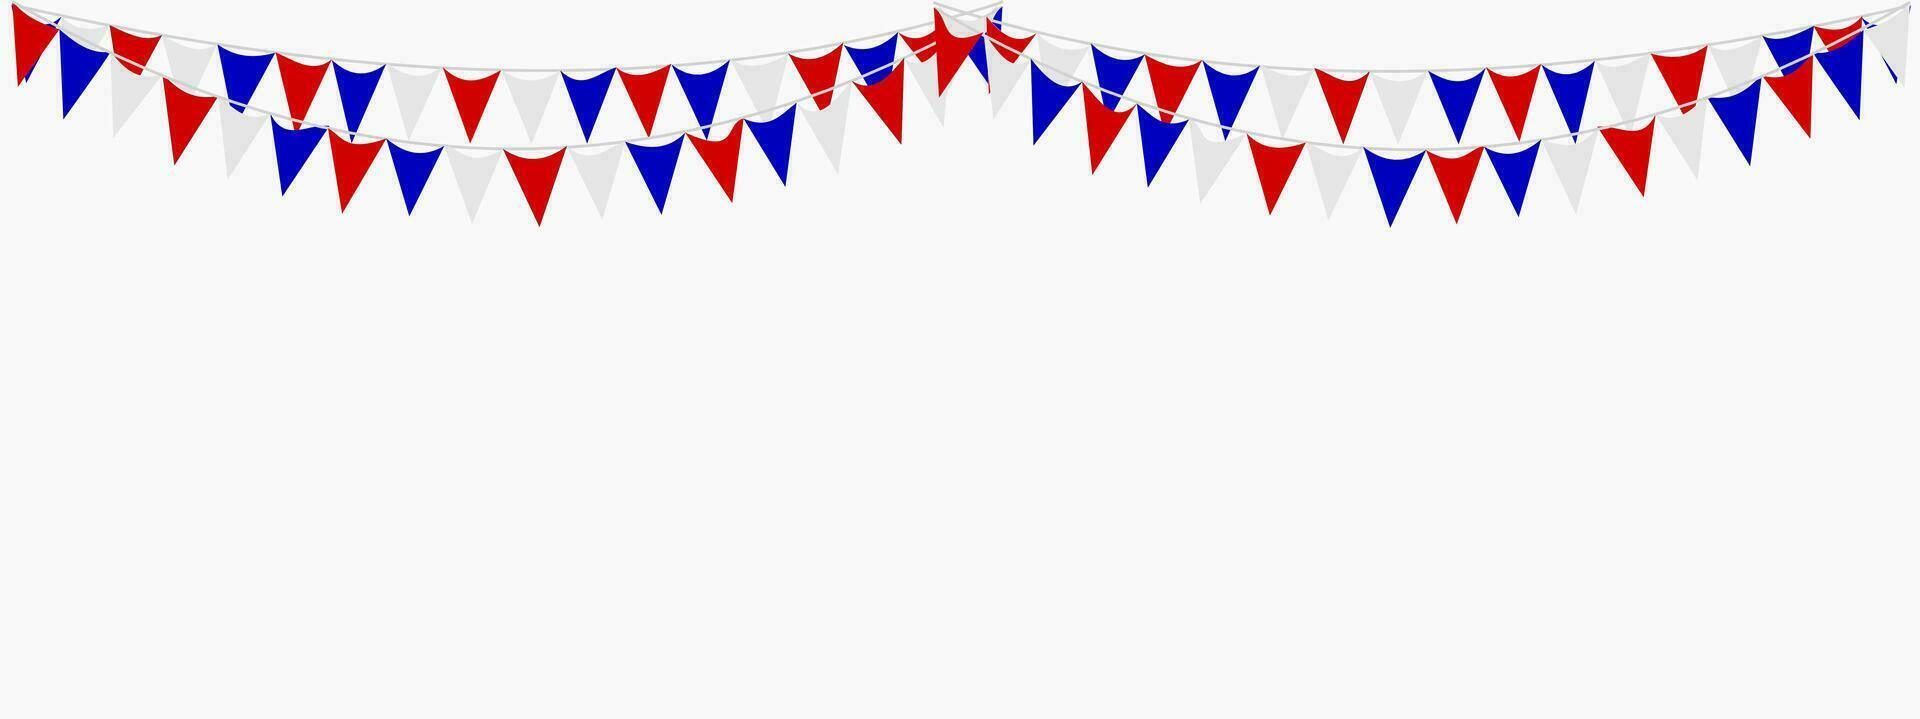 Bunting Hanging Red White Blue Flags Triangles Banner Background. USA, United State of America, France, Thailand, New Zealand, Netherlands, British, Great Britain. vector